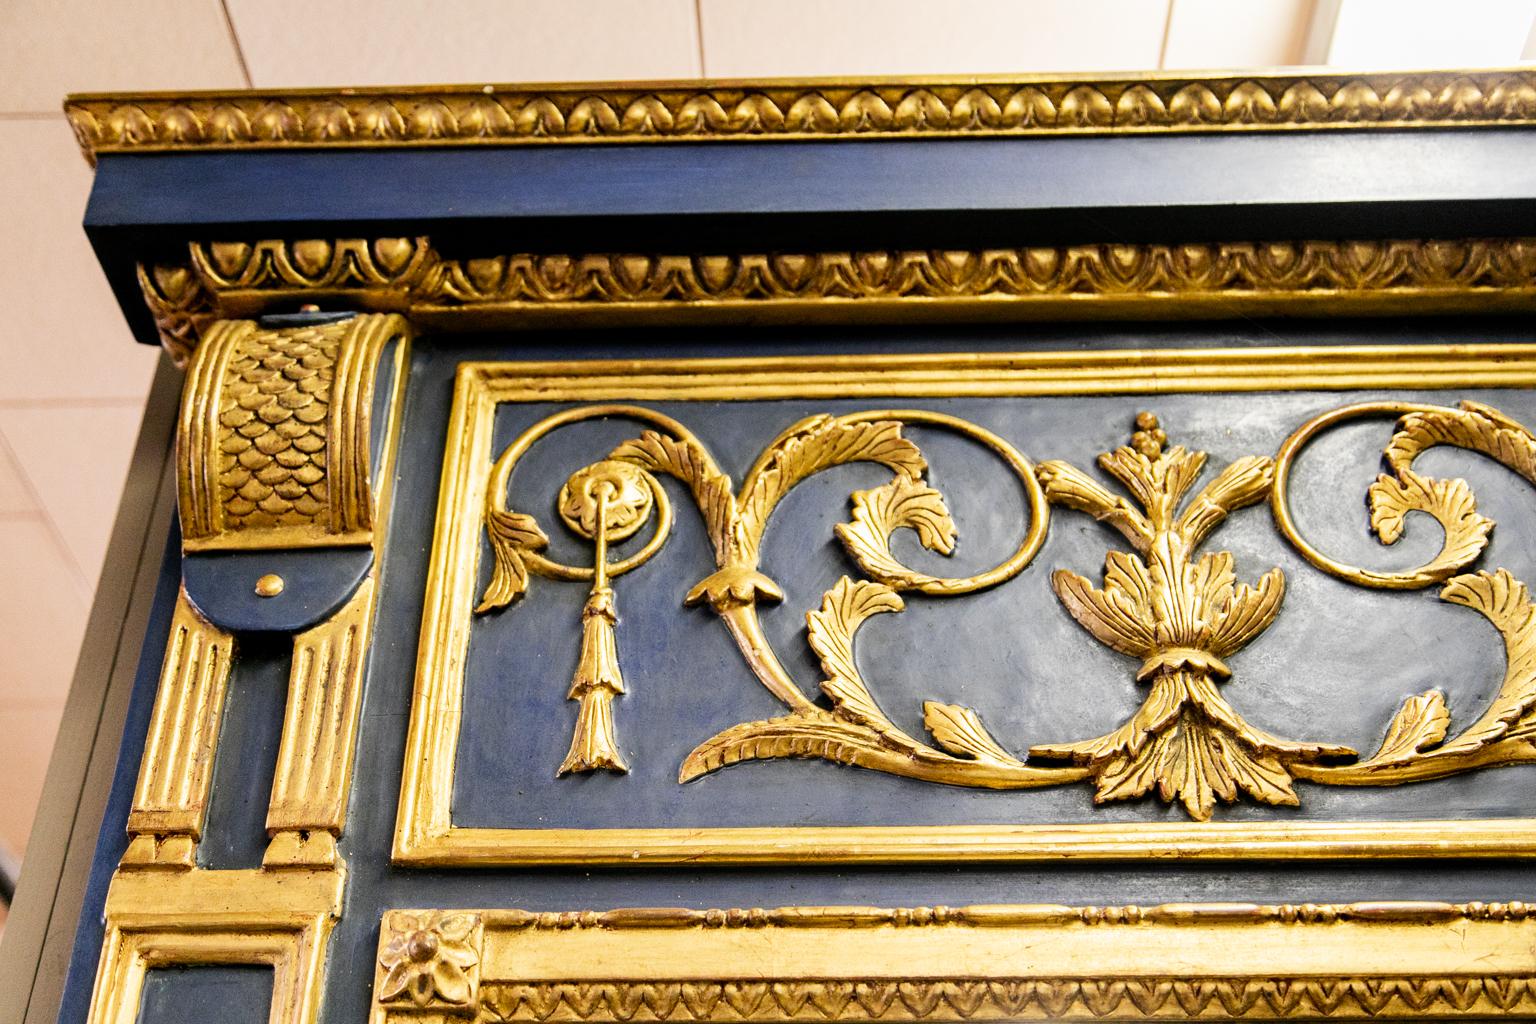 French Louis XVI style mirror has hand carved gilt egg and dart molding on the cornice. The side panels are carved in high relief with leaf and vine panels. The frieze has floral arabesques with pendant tassels. The mirror is beveled and slightly